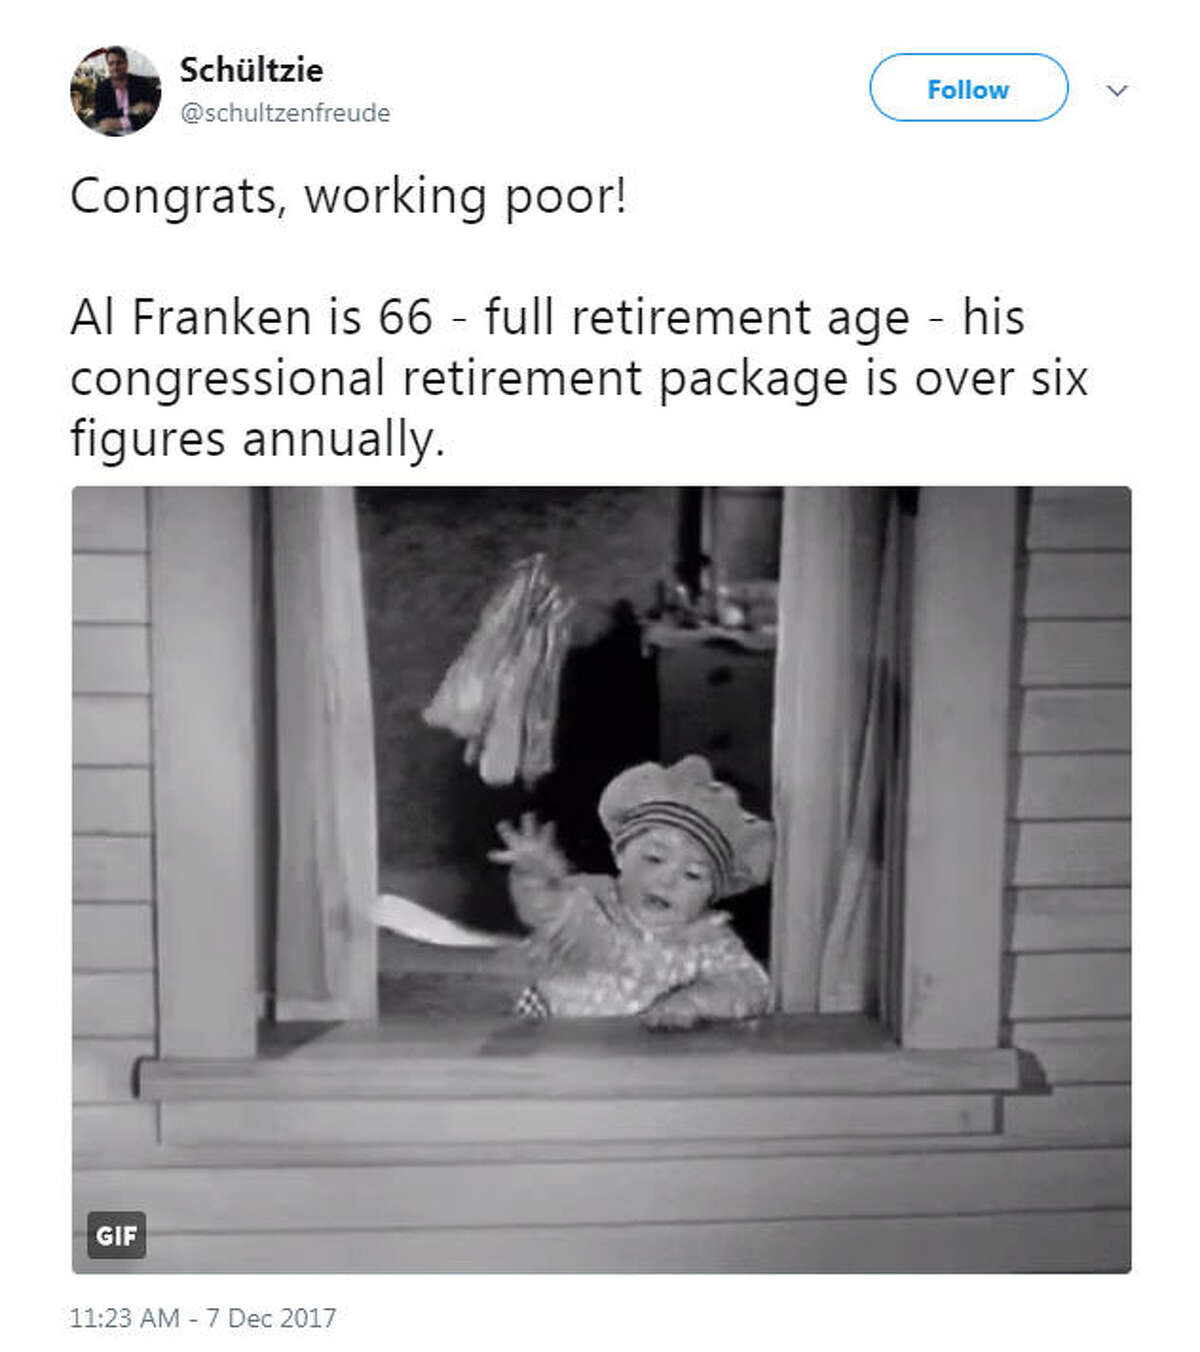 "Congrats, working poor! Al Franken is 66 - full retirement age - his congressional retirement package is over six figures annually. " Source: Twitter